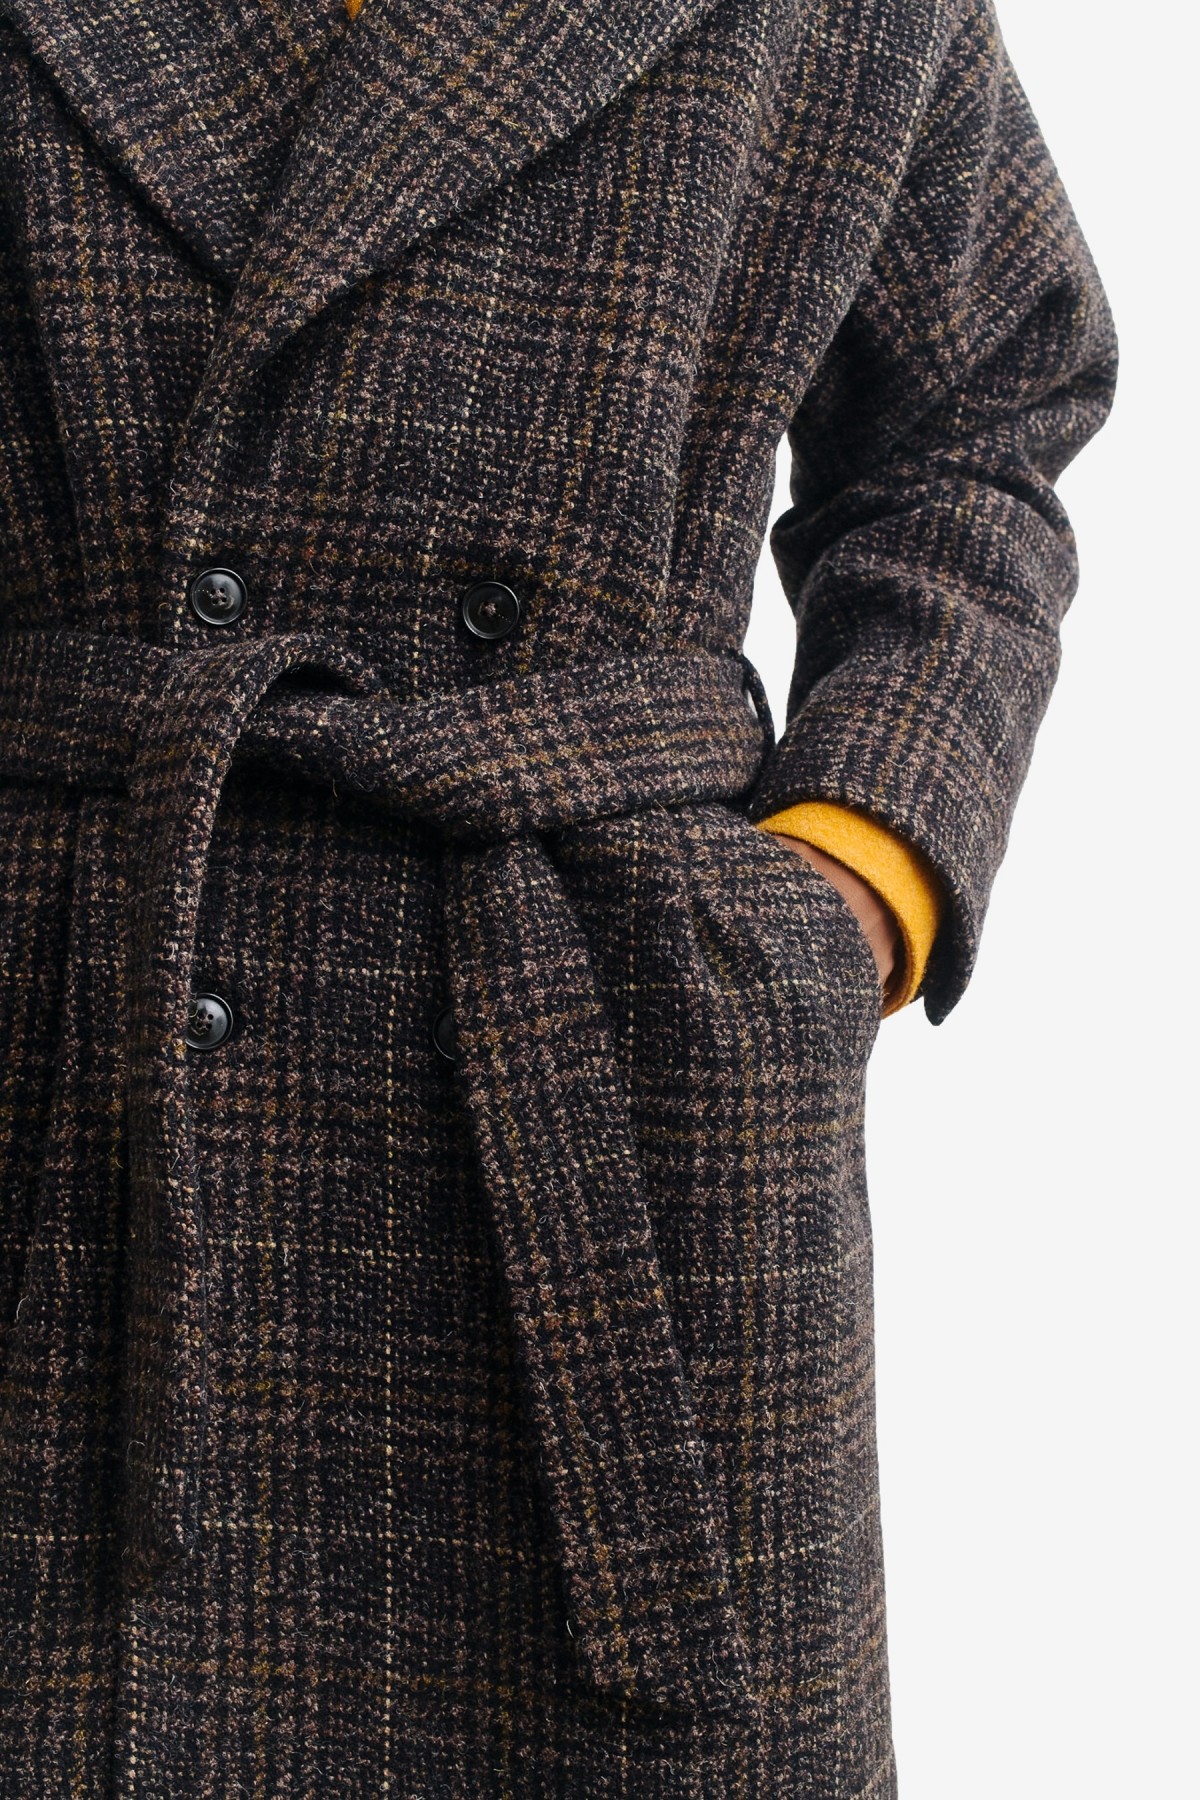 A Kind of Guise Katla Coat in Fireplace Check